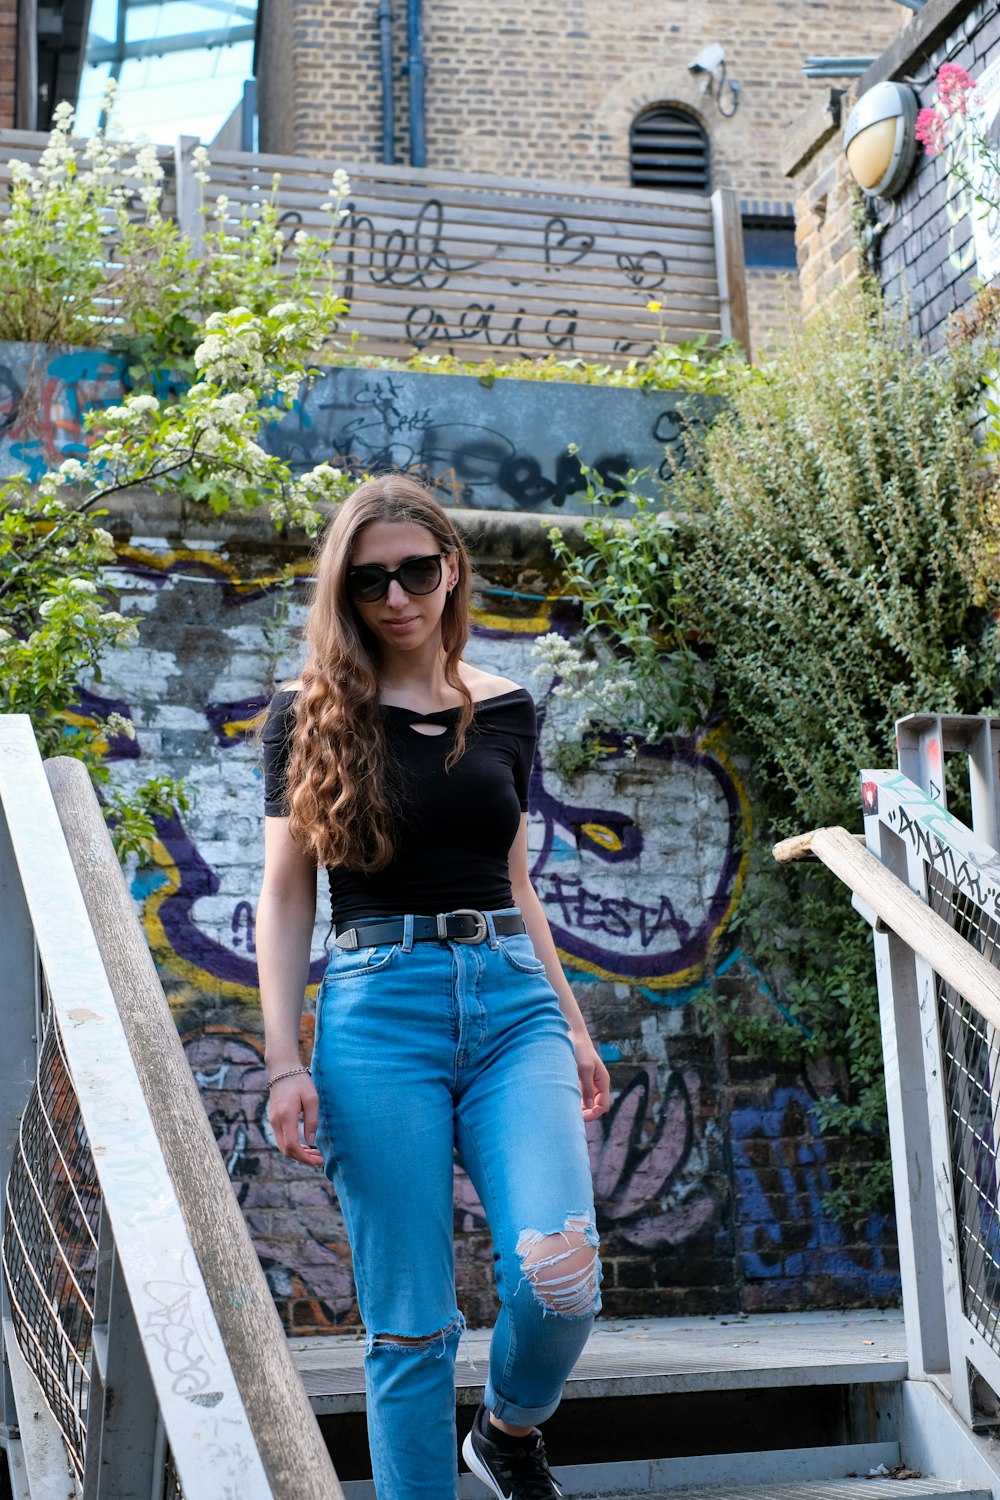 Woman in black tank top and blue denim jeans sitting on brown wooden bench  during daytime photo – Free Jeans Image on Unsplash